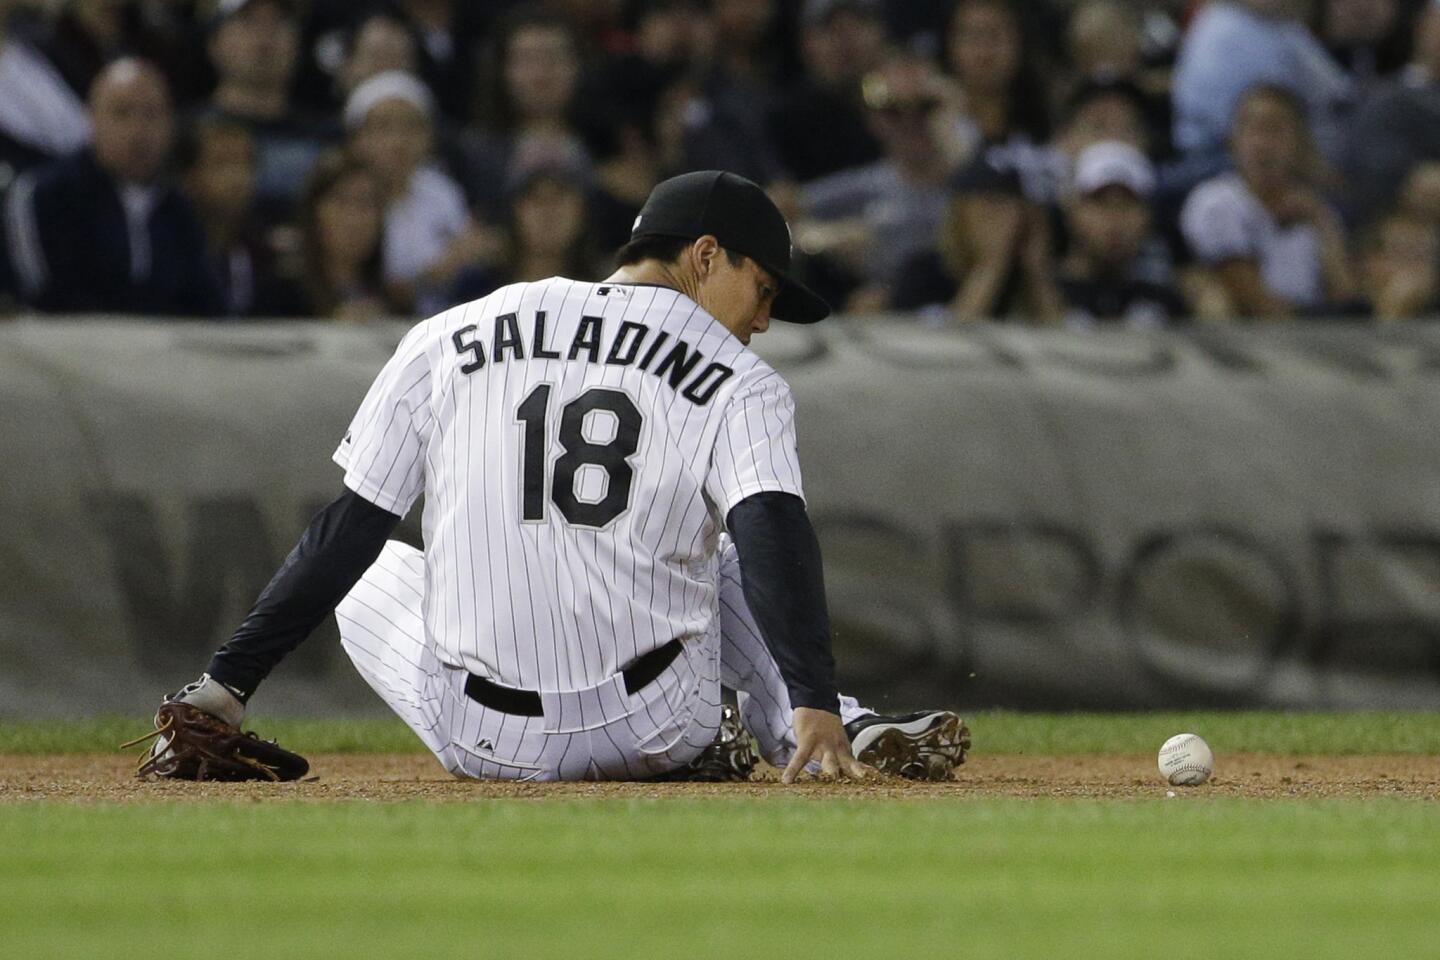 White Sox third baseman Tyler Saladino misses a ball hit by Seattle Mariners' Robinson Cano during the fourth inning.